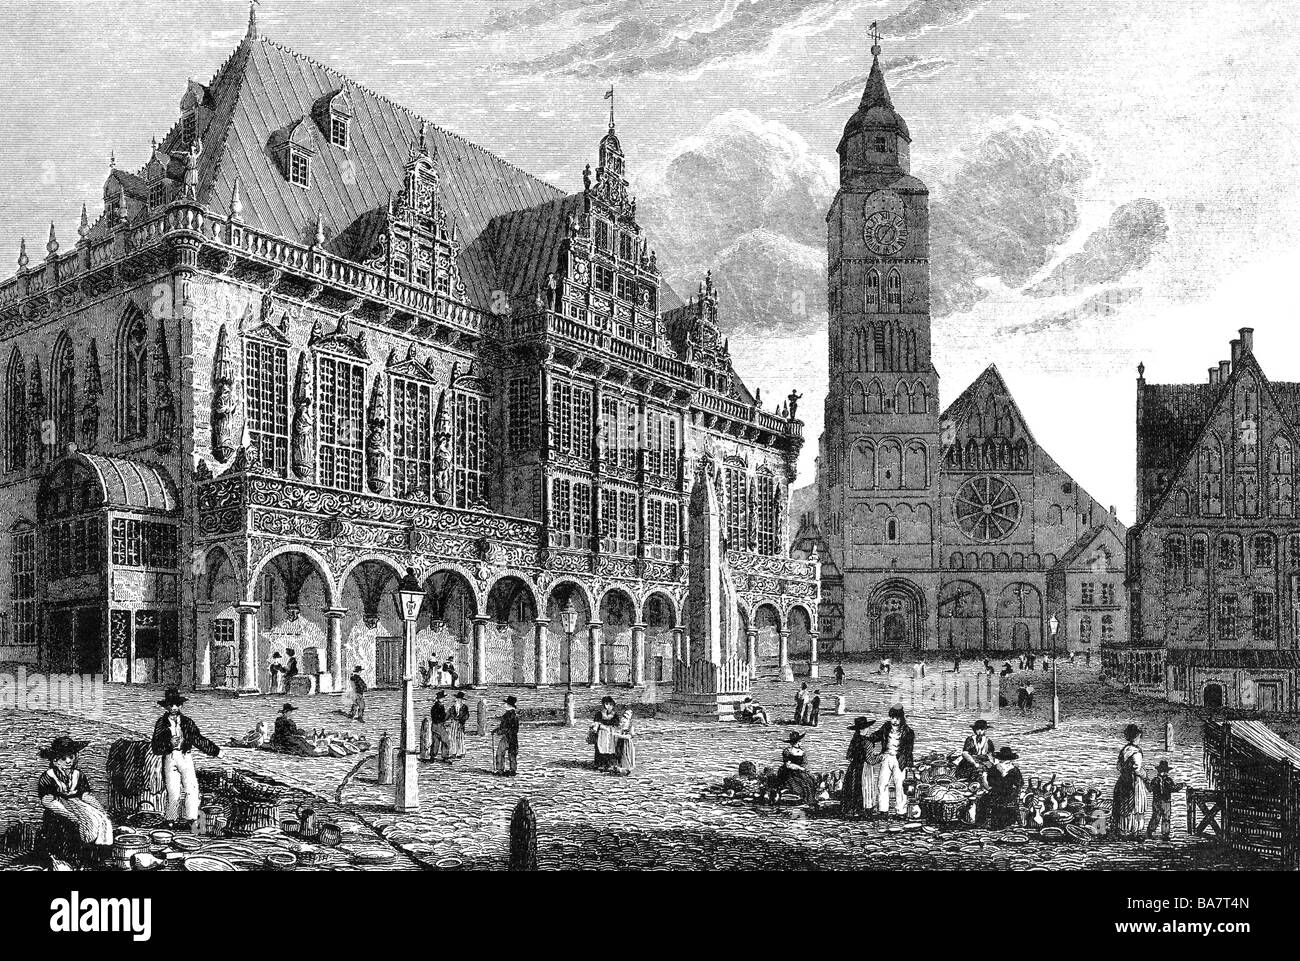 geography / travel, Germany, Bremen, Town Hall, exterior view, woodengravin by J. Godden after drawing by Captain Batty, early 19th century, Rathaus, Church, Cathedral, market place, historic, historical, UNESCO World Cultural Heritage Site / Sites, people, Stock Photo